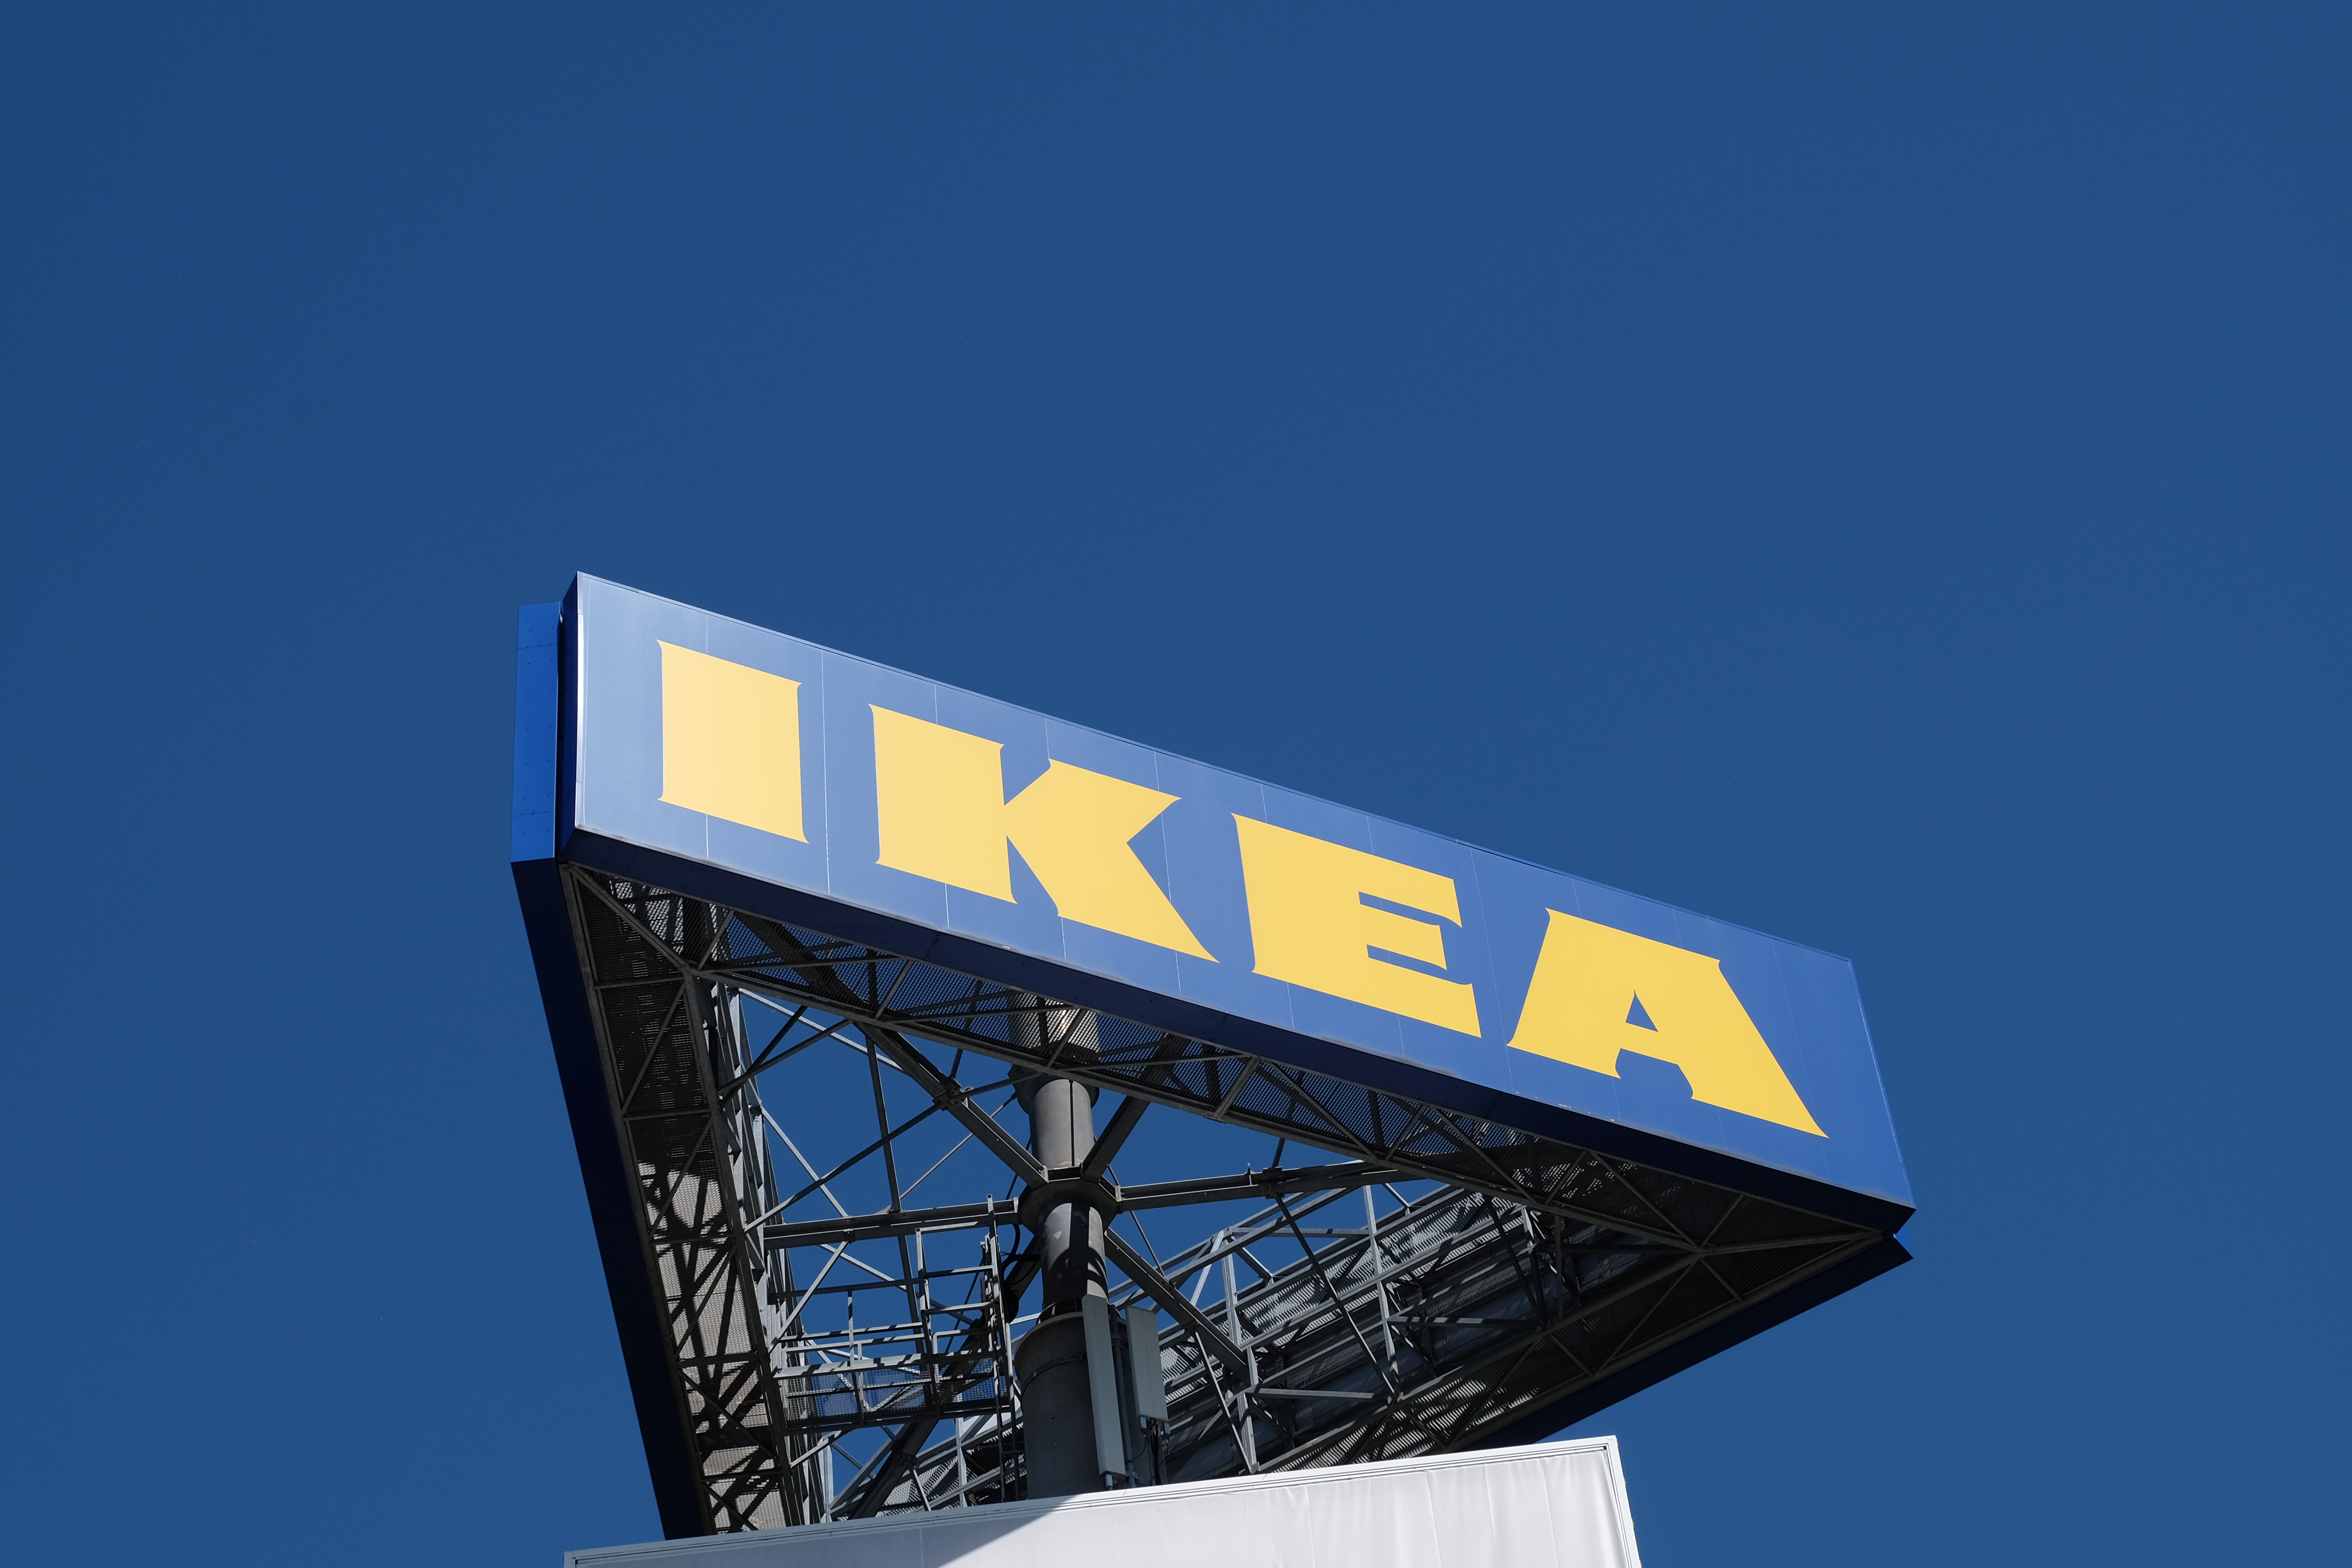 IKEA, Sustainable Lifestyles & Education MAC member, decreases climate footprint while growing business One Planet network